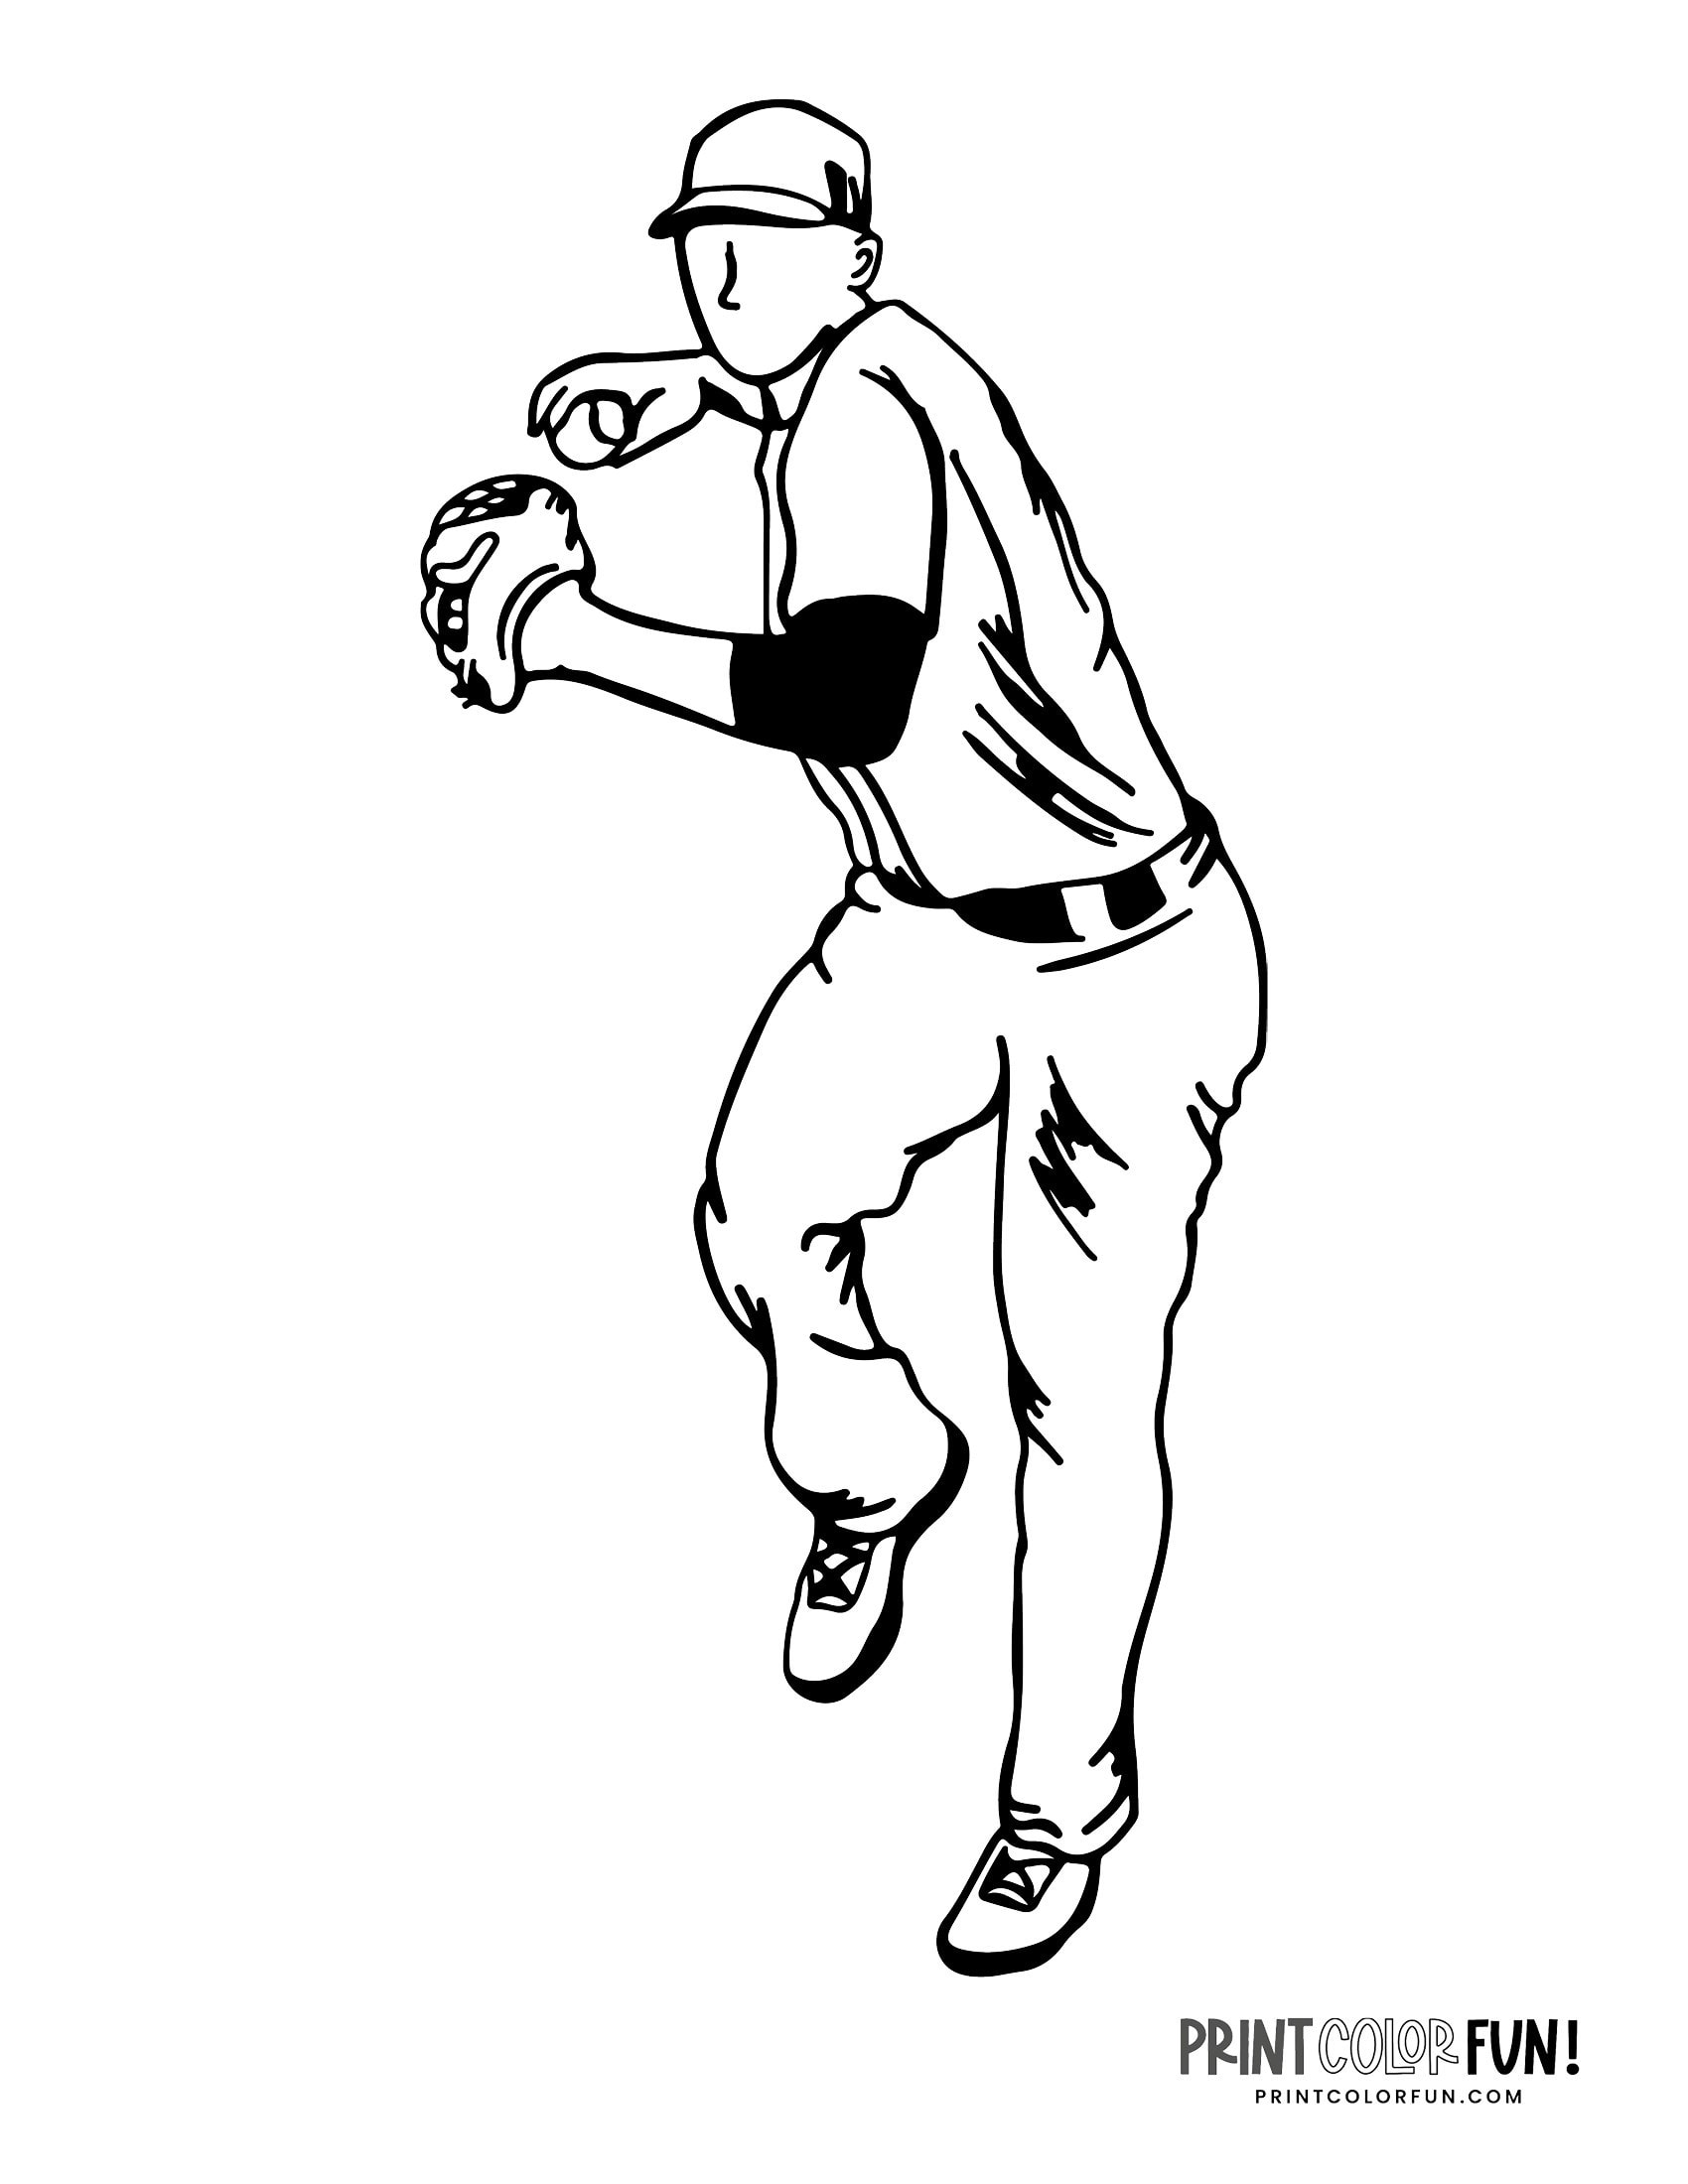 14-baseball-player-coloring-pages-free-sports-printables-print-color-fun